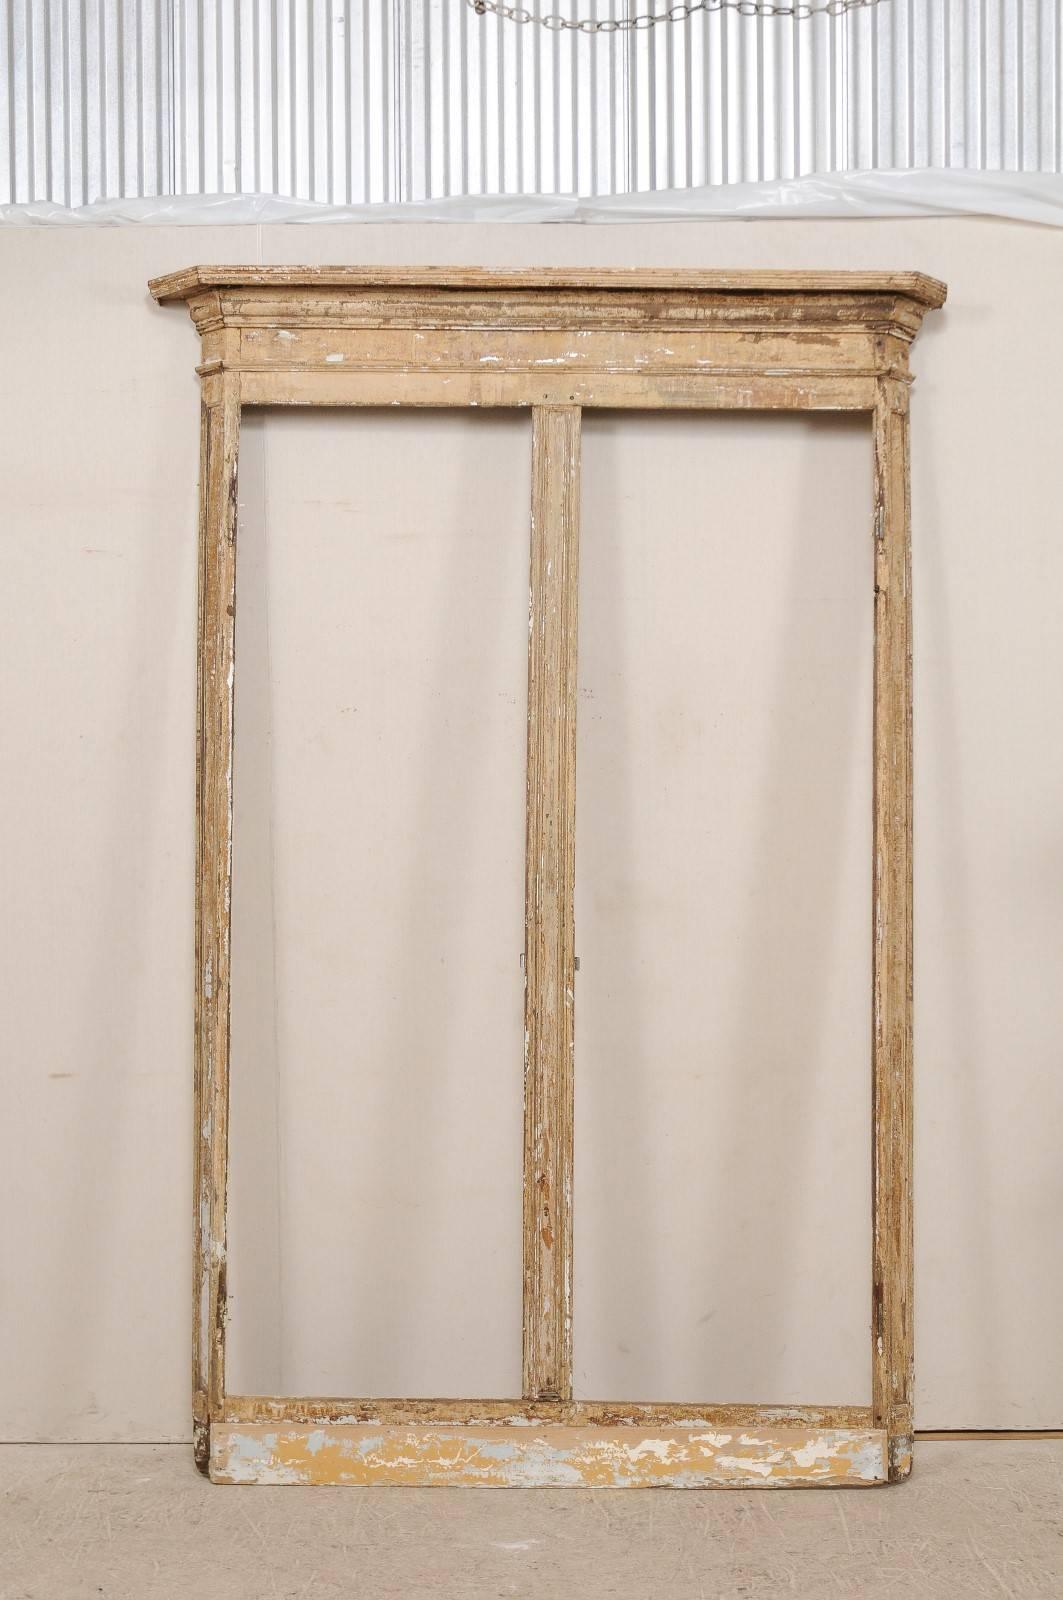 An Italian Pair of Early 19th C. Wood Doors Within Original Casing & Molding For Sale 4